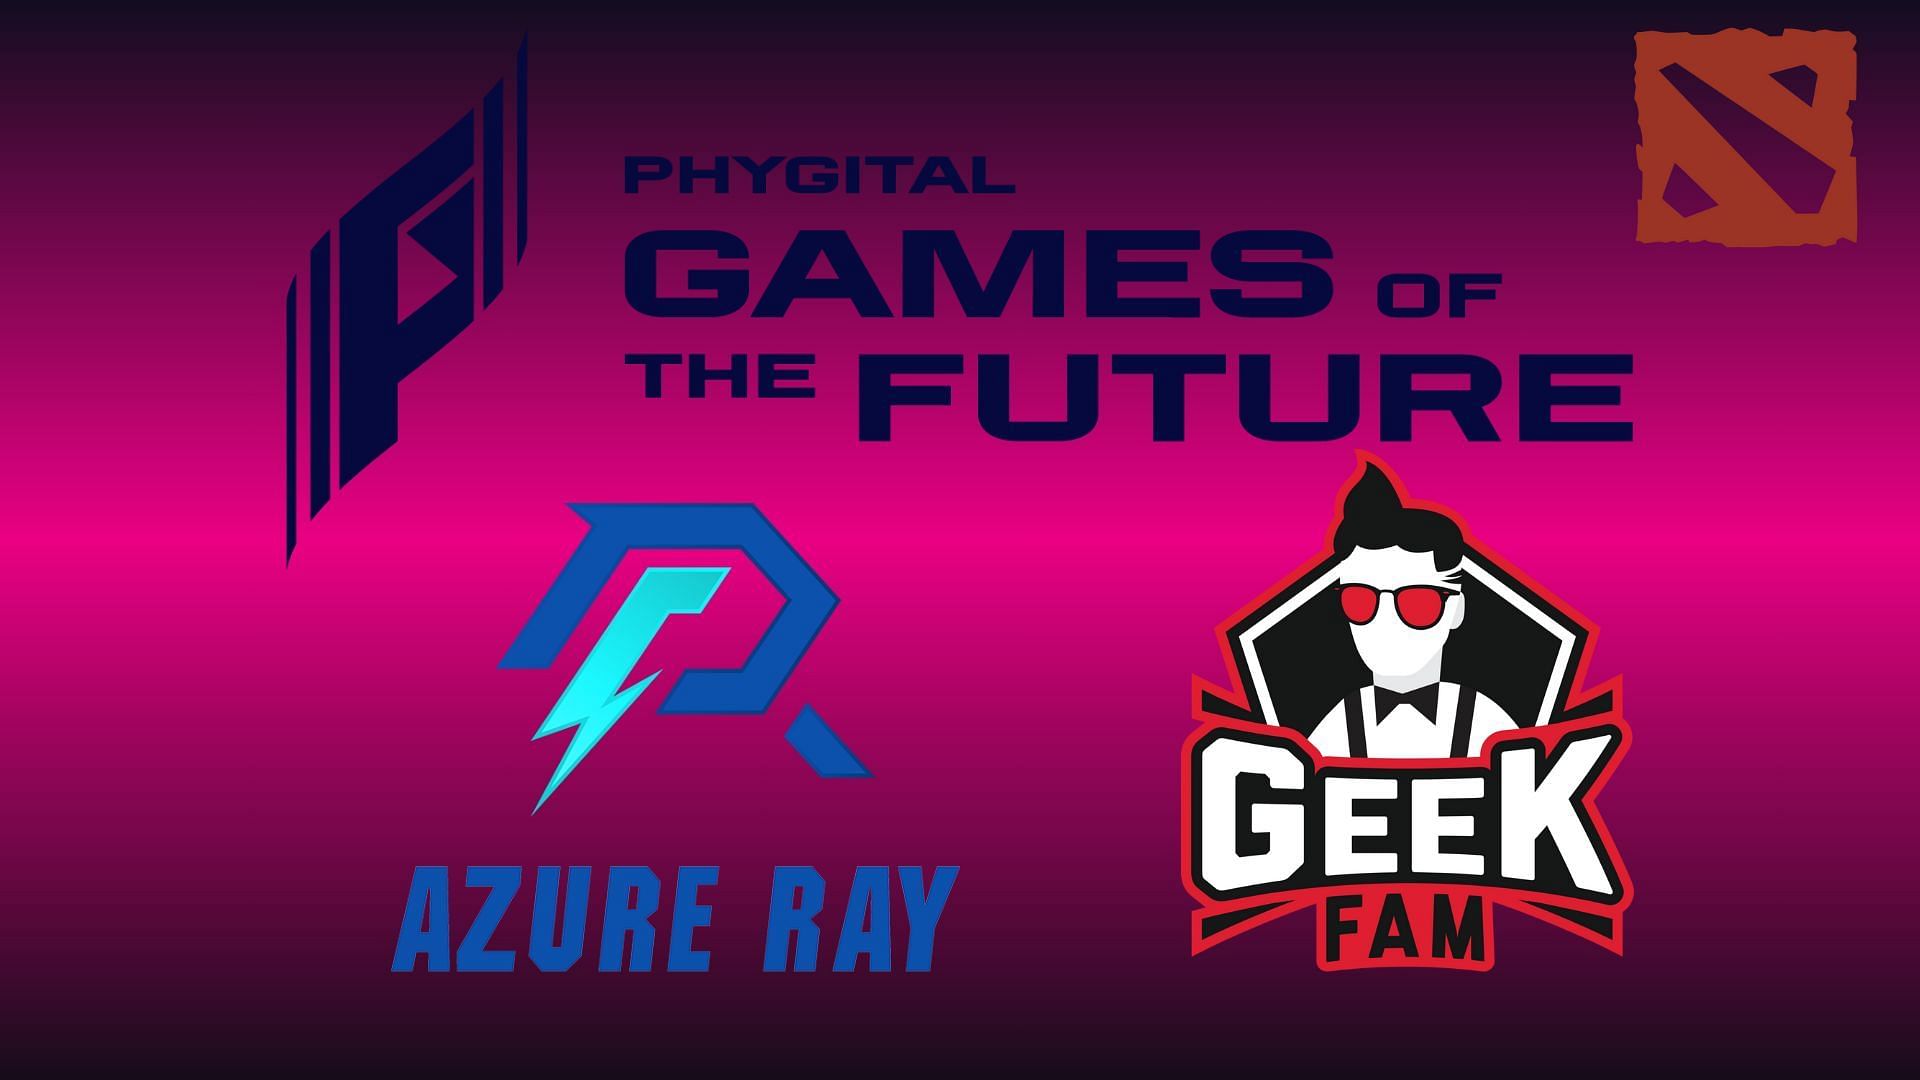 Azure Ray vs Geek Farm overview, predictions, and more